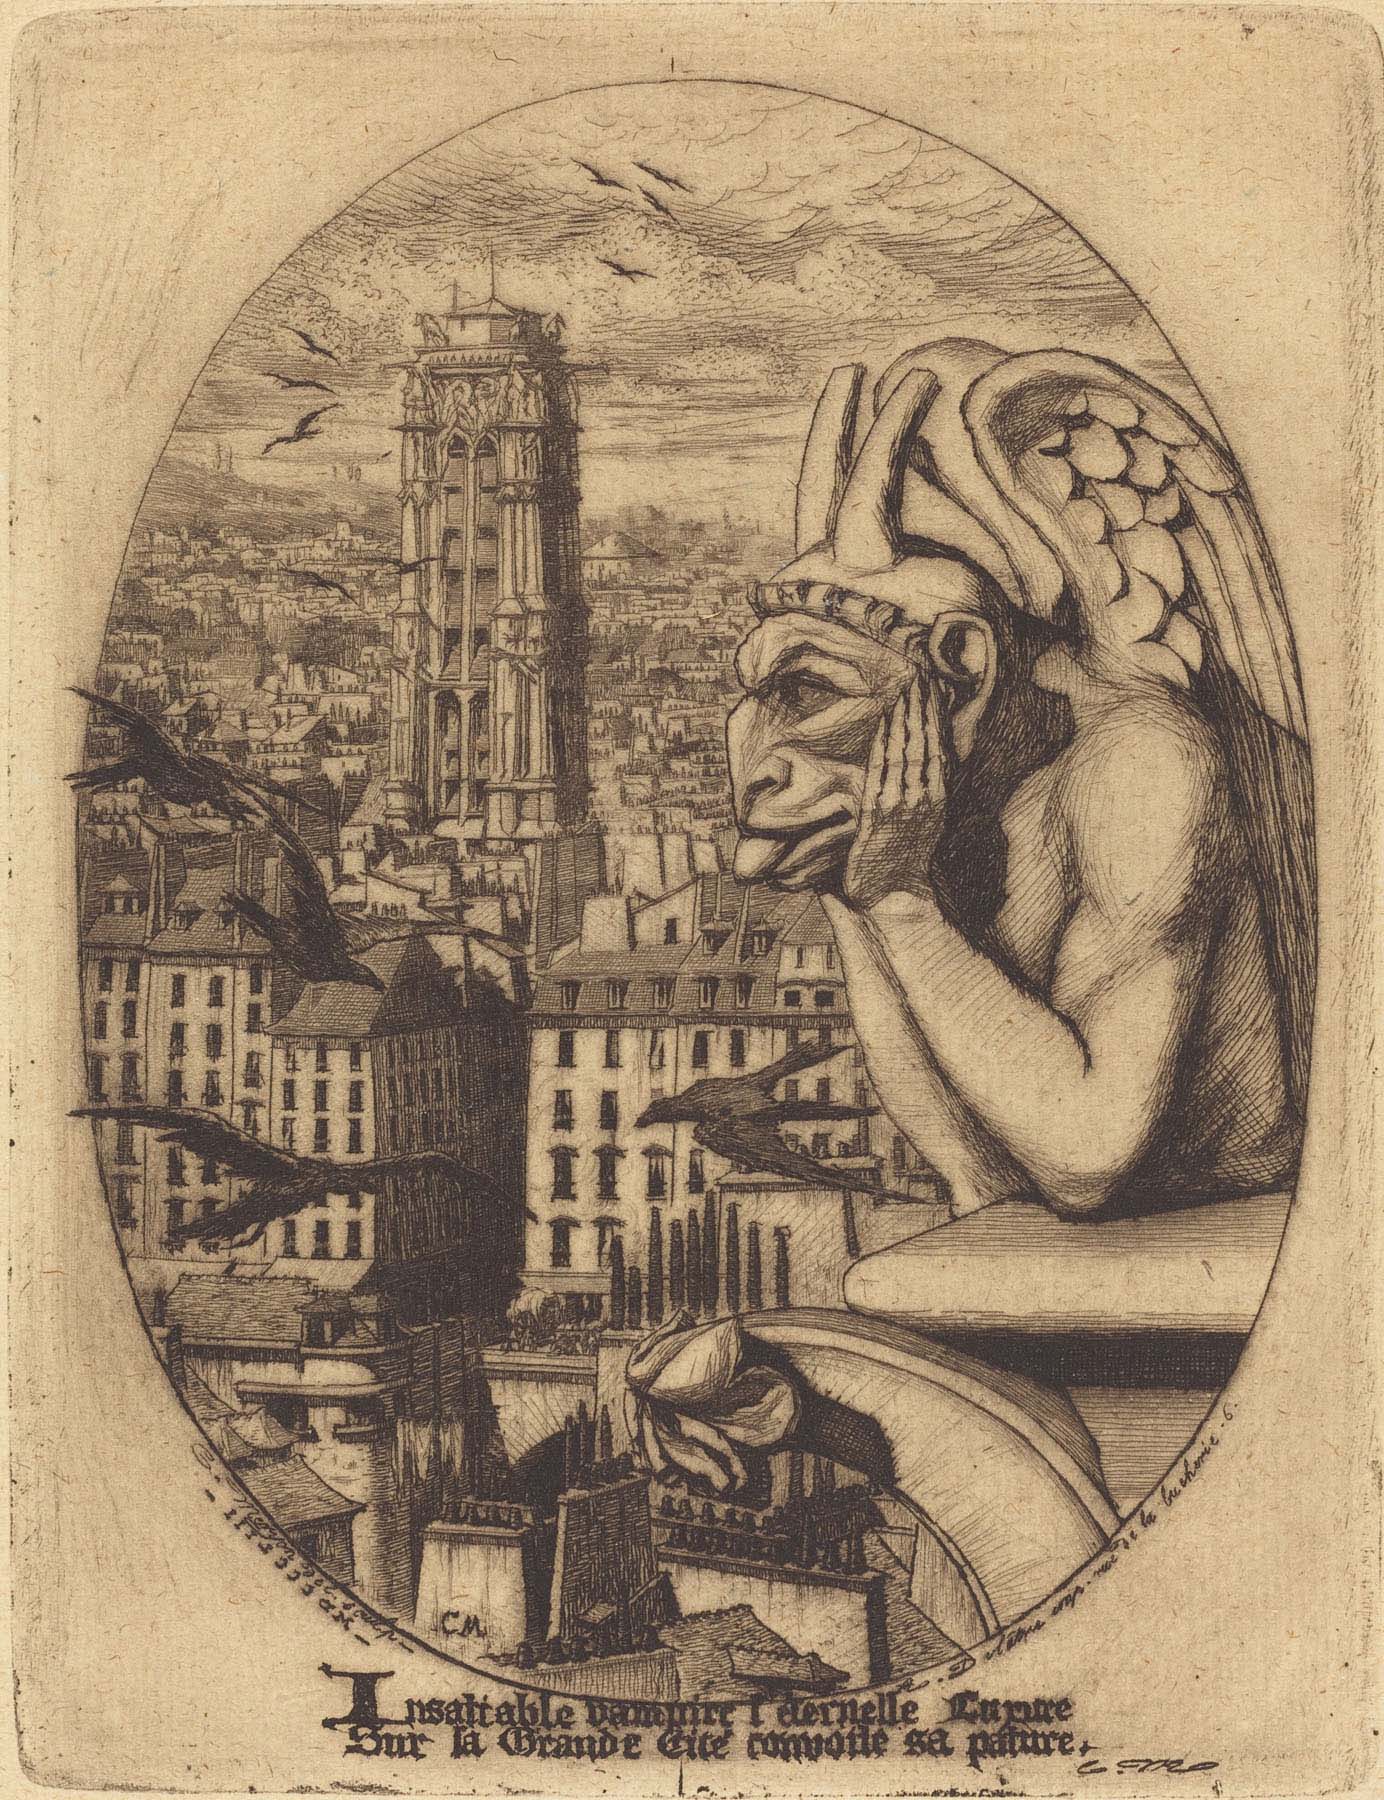 Print of a gargoyle mounted on a building with its head in its hands and sticking out its tongue, with a cityscape and flying birds in the background.